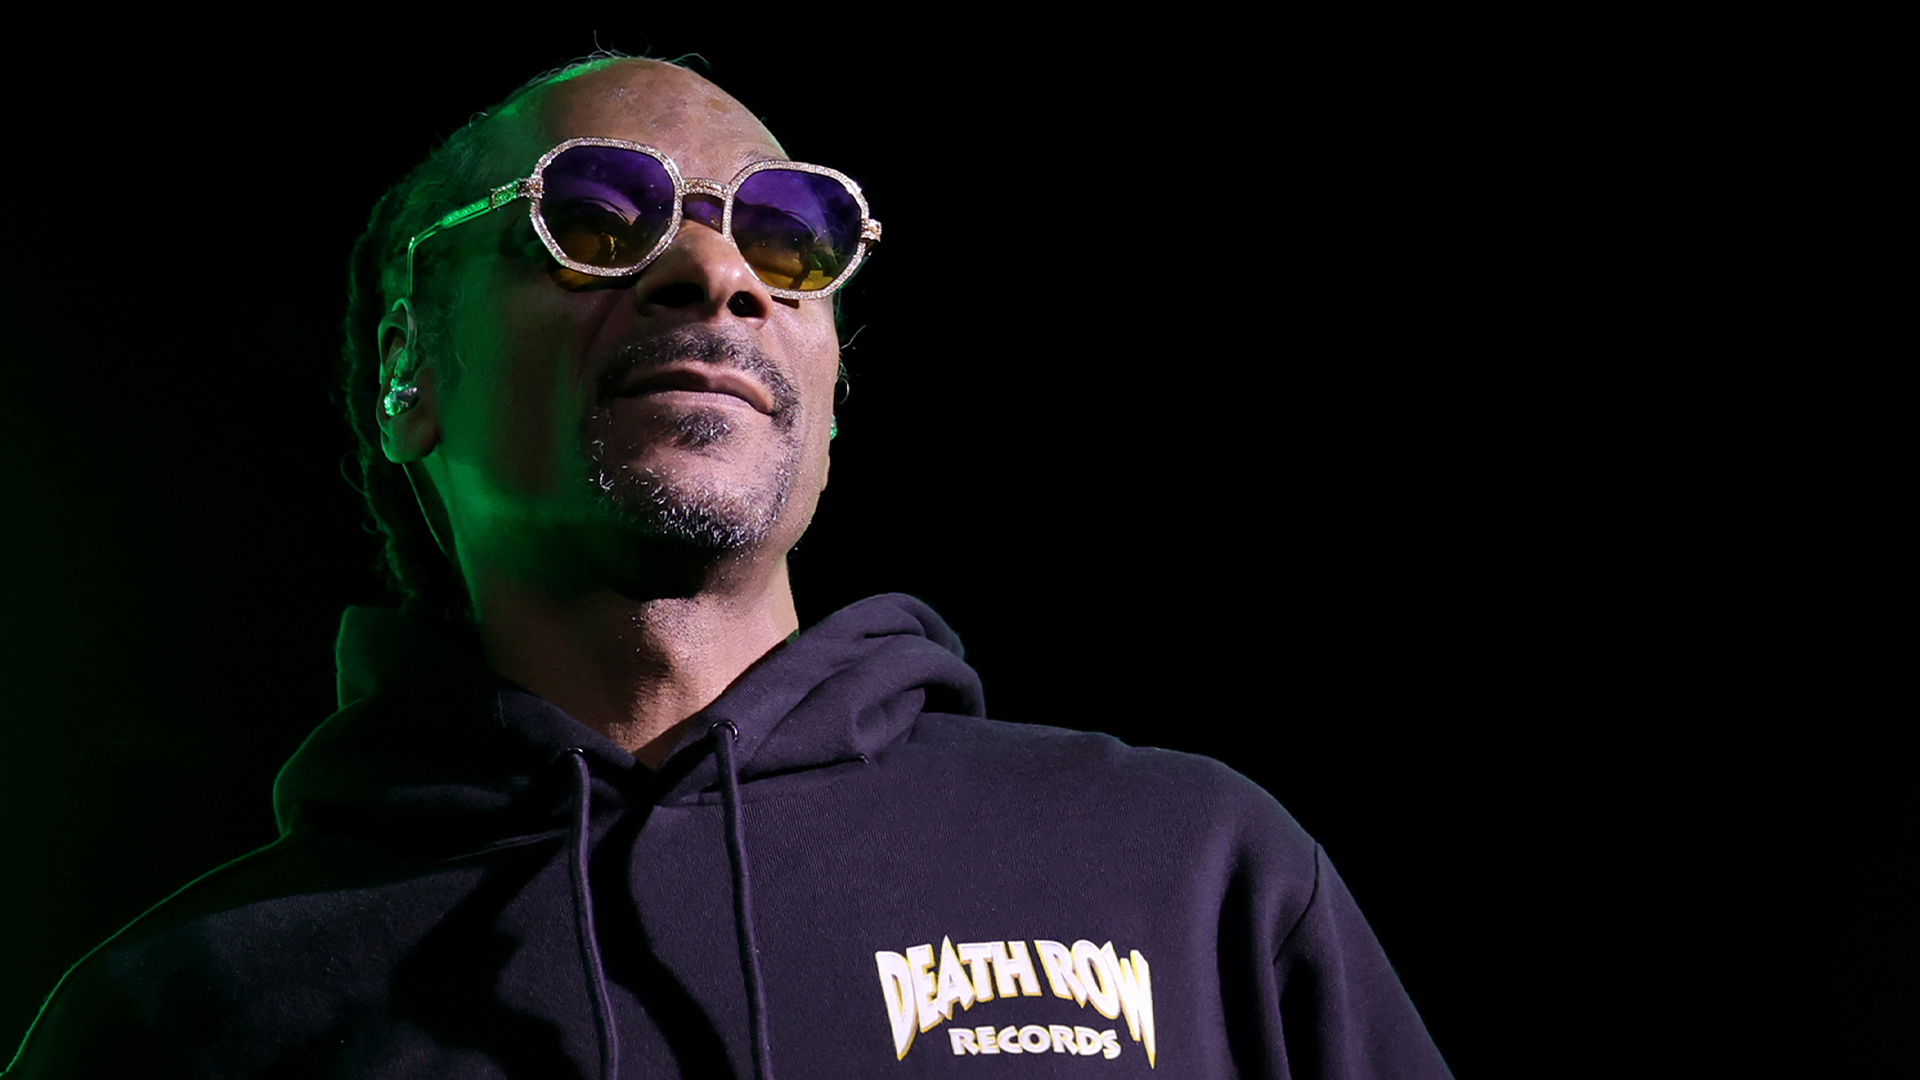 Snoop Dogg Grants Rights To Atlas Global To Use His Name, Likeness To Sell Cannabis Products Internationally